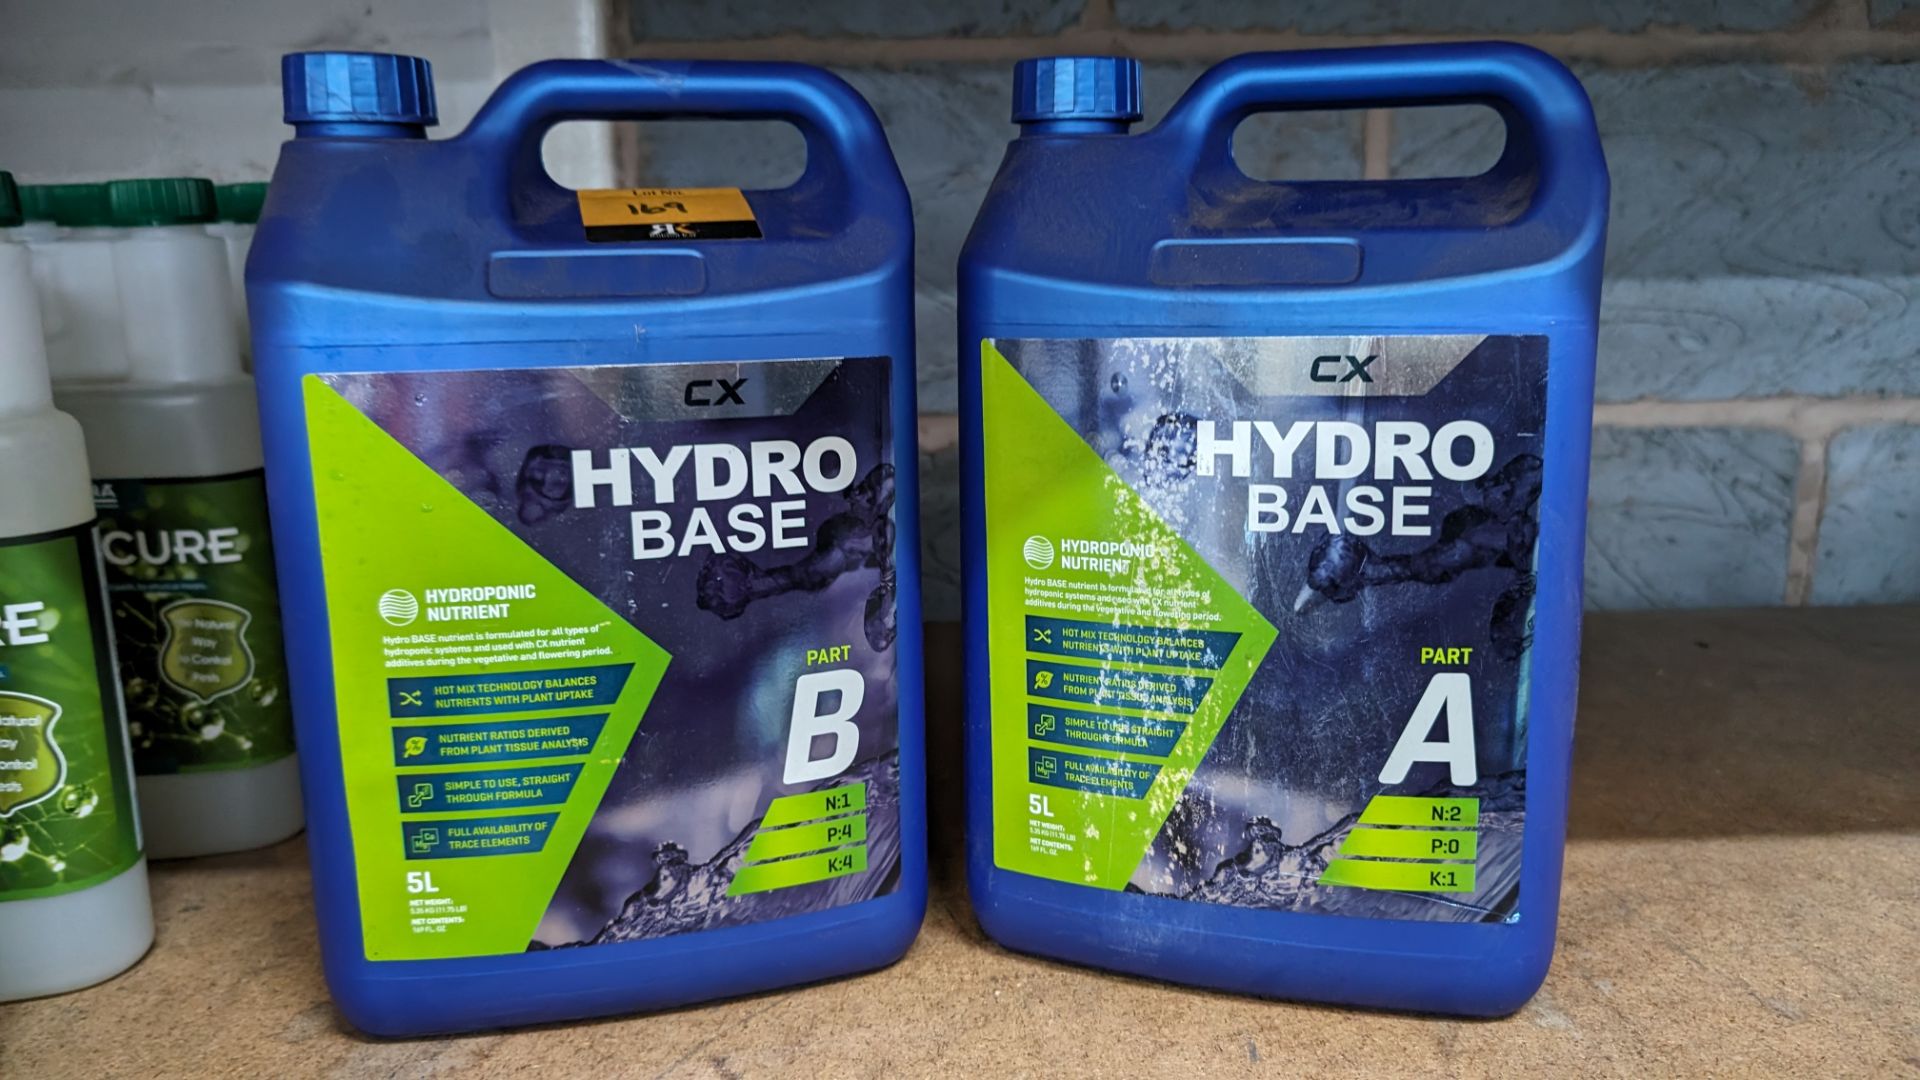 2 bottles of hydroponic nutrient CX hydro base. This lot comprises 1 off 5 litre bottle of Part A & - Image 2 of 4